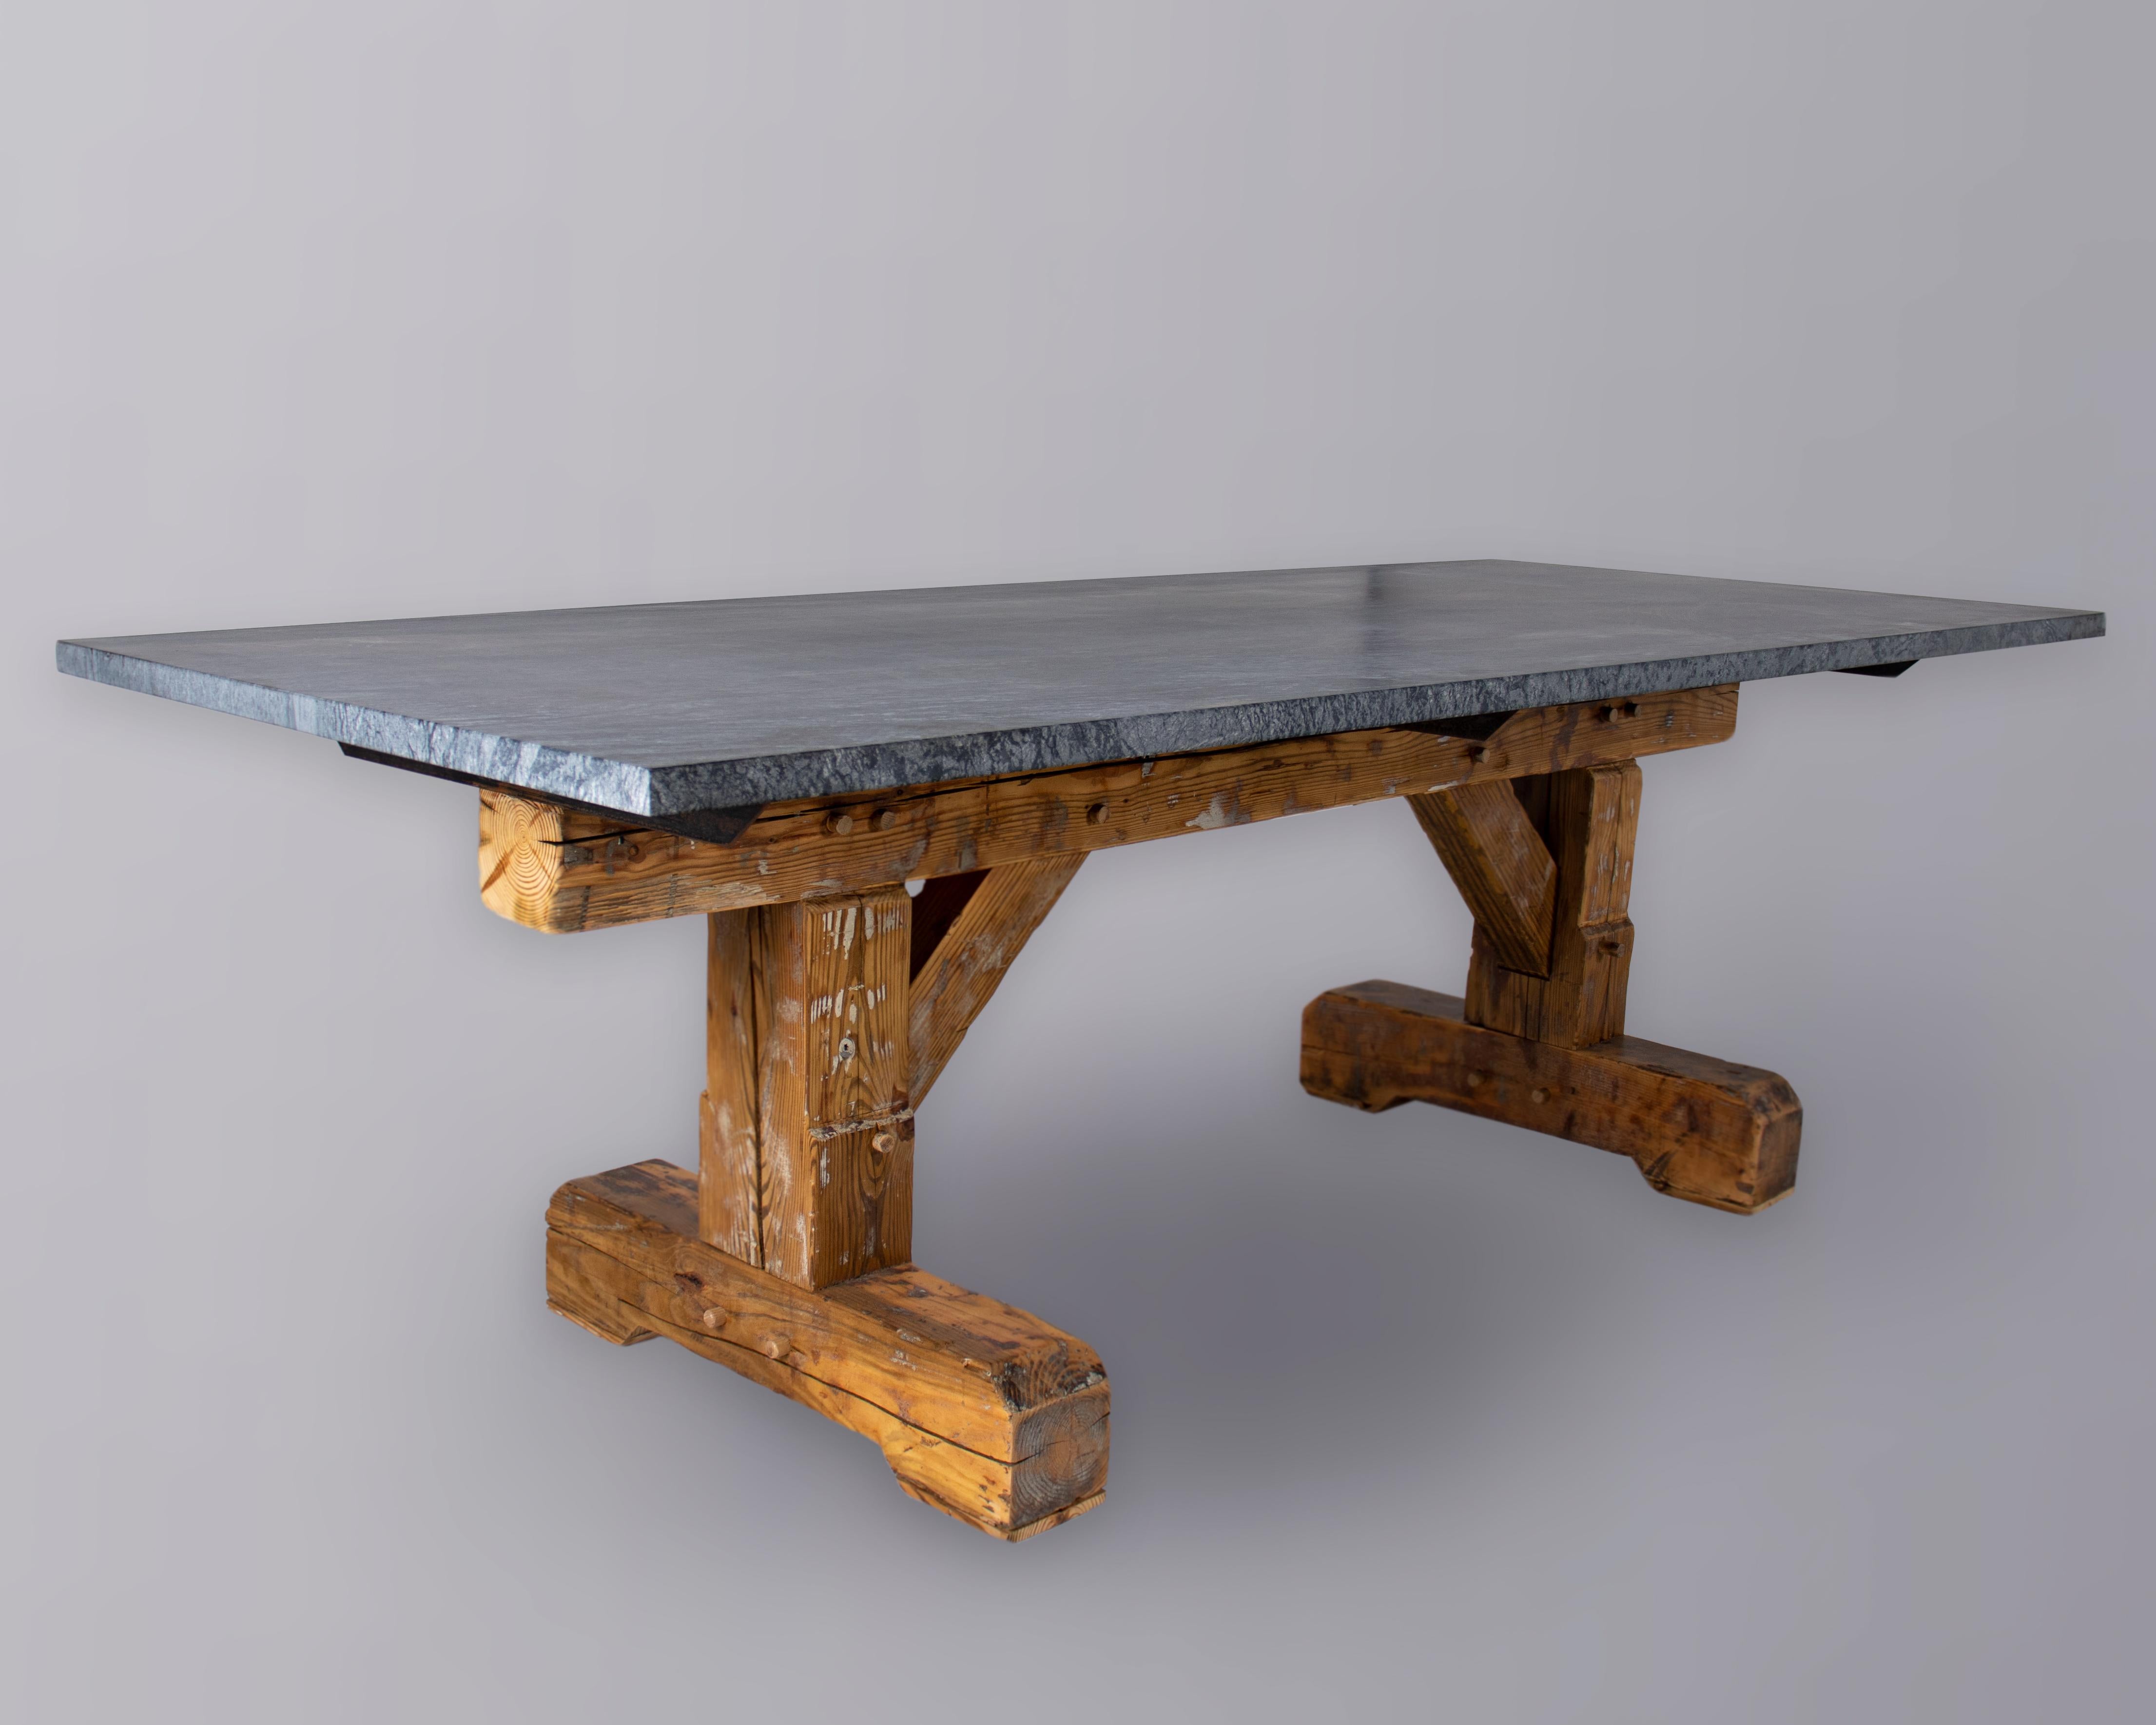 Stope stone leathered top with reclaimed barn beam table base.